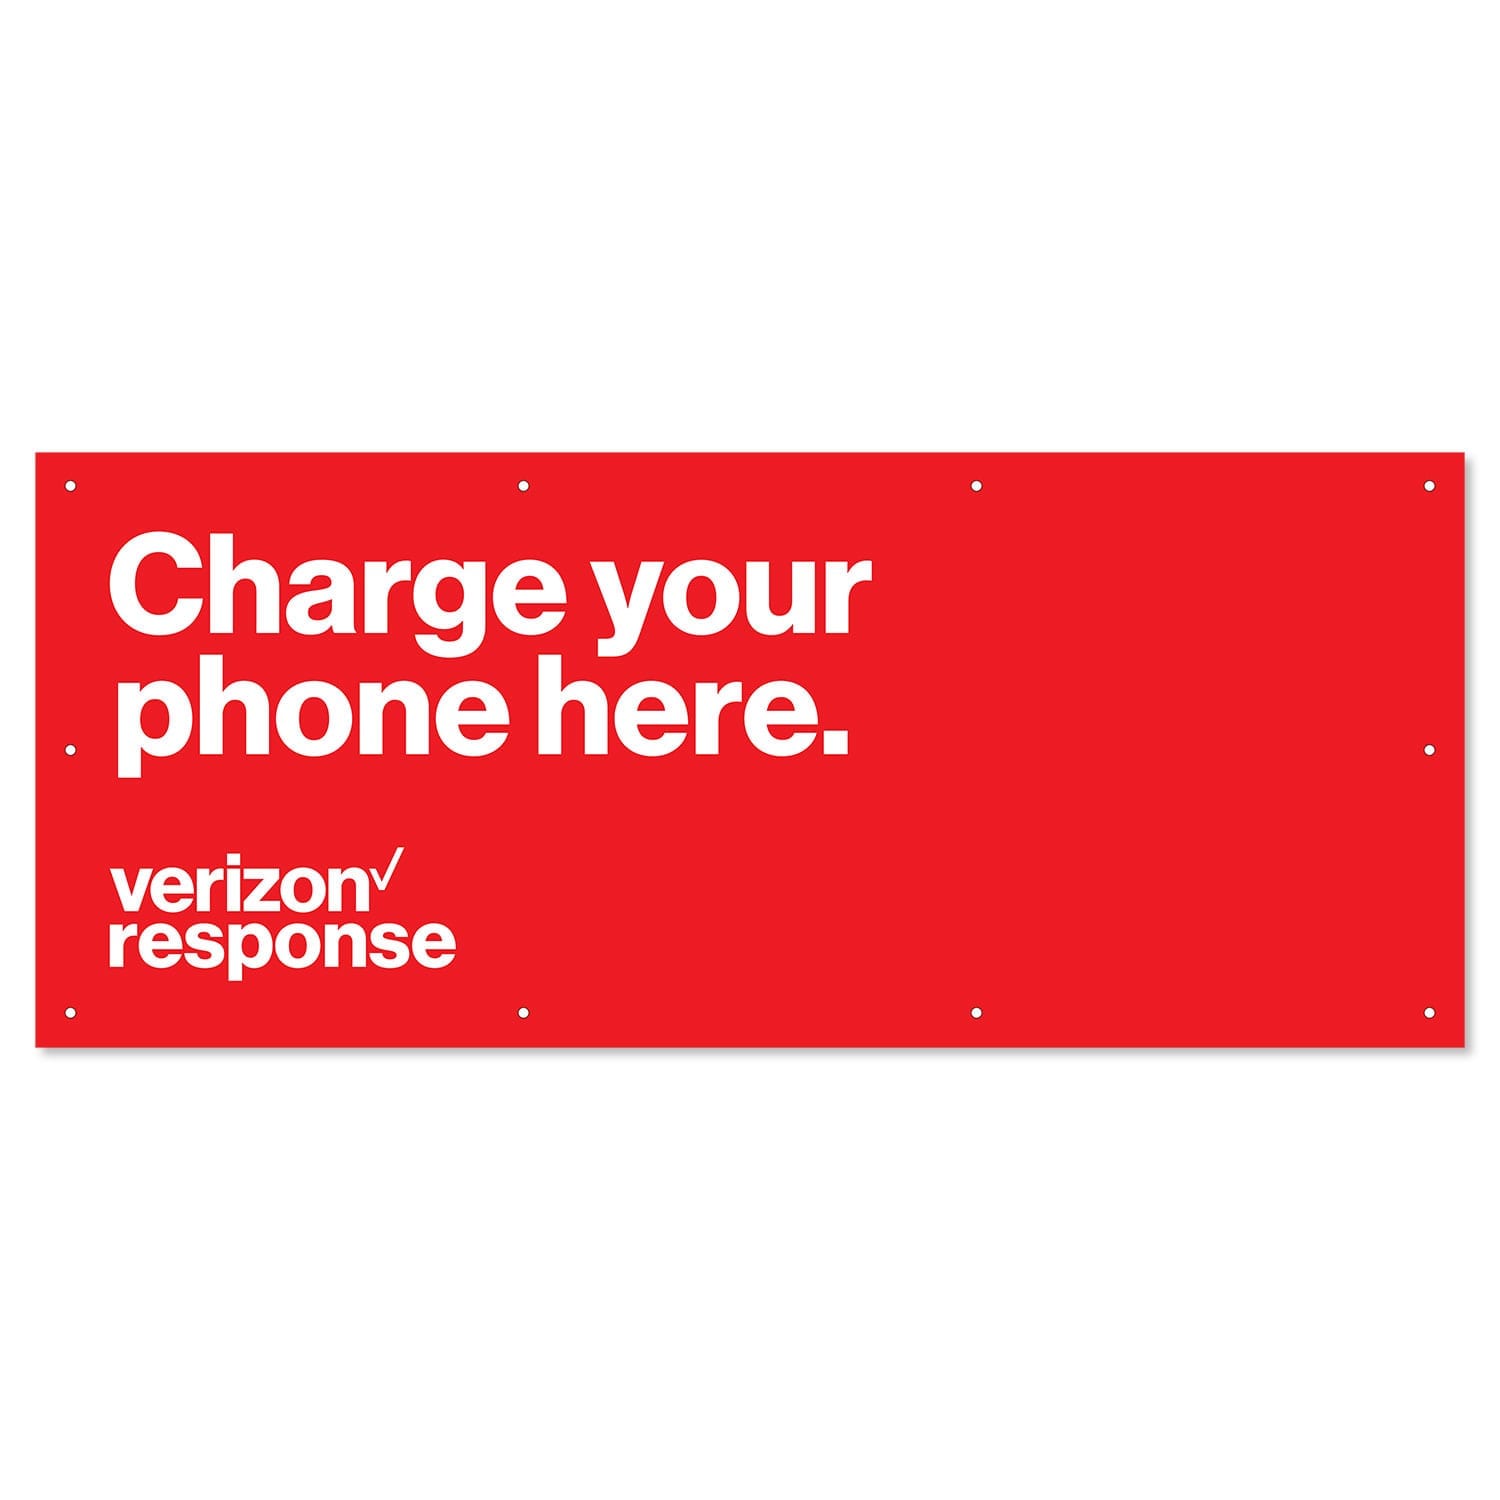 Verizon Response Charge Your Phone Here Banner